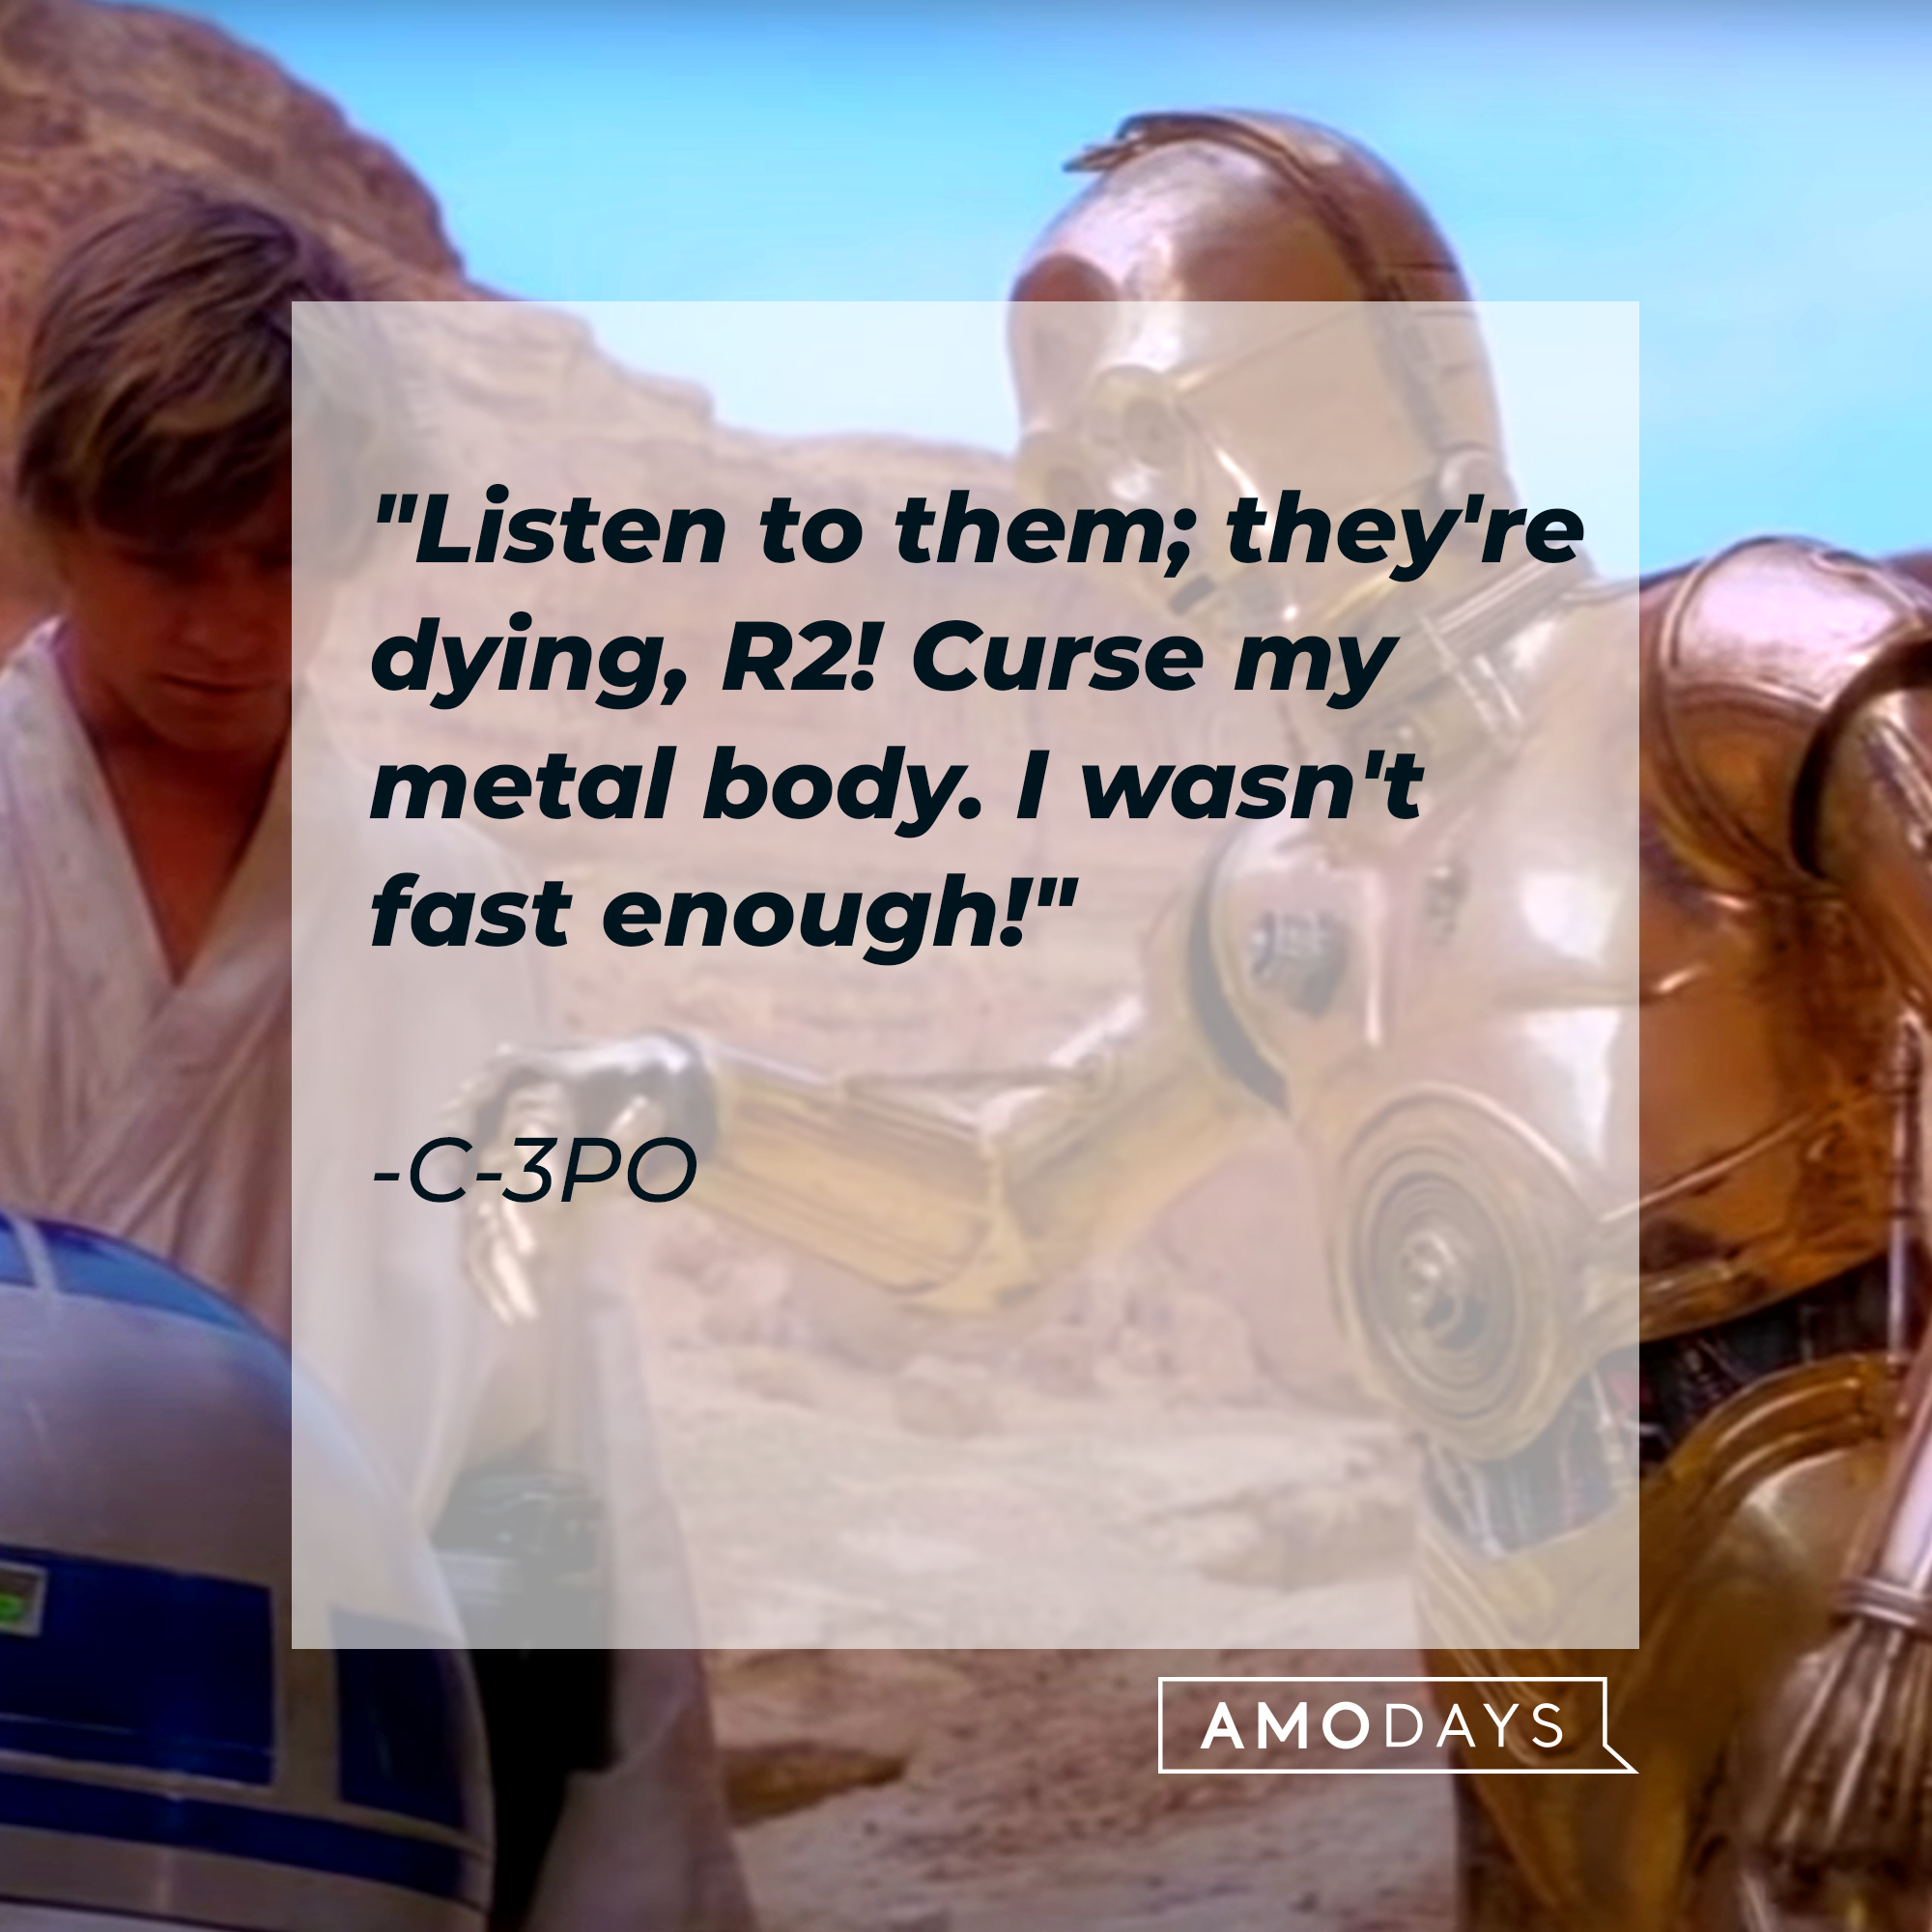 C-3PO's quote, "Listen to them; they're dying, R2! Curse my metal body. I wasn't fast enough!" | Source: Facebook/StarWars